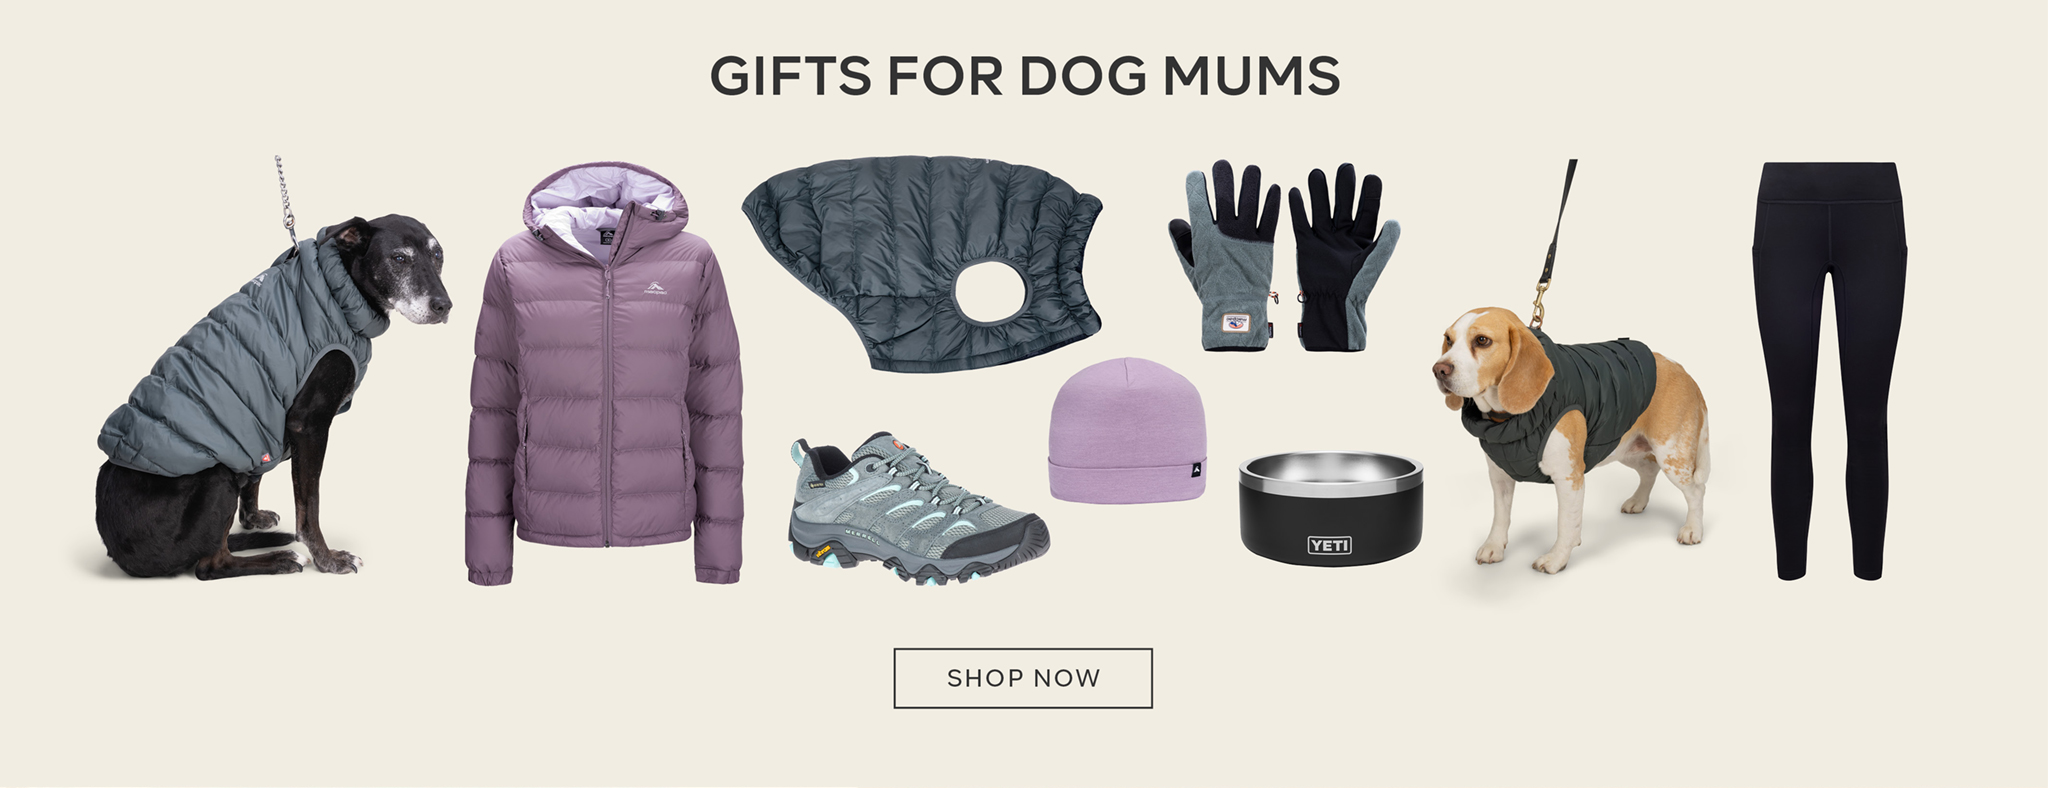 GIFTS FOR DOG MUMS - SHOP NOW